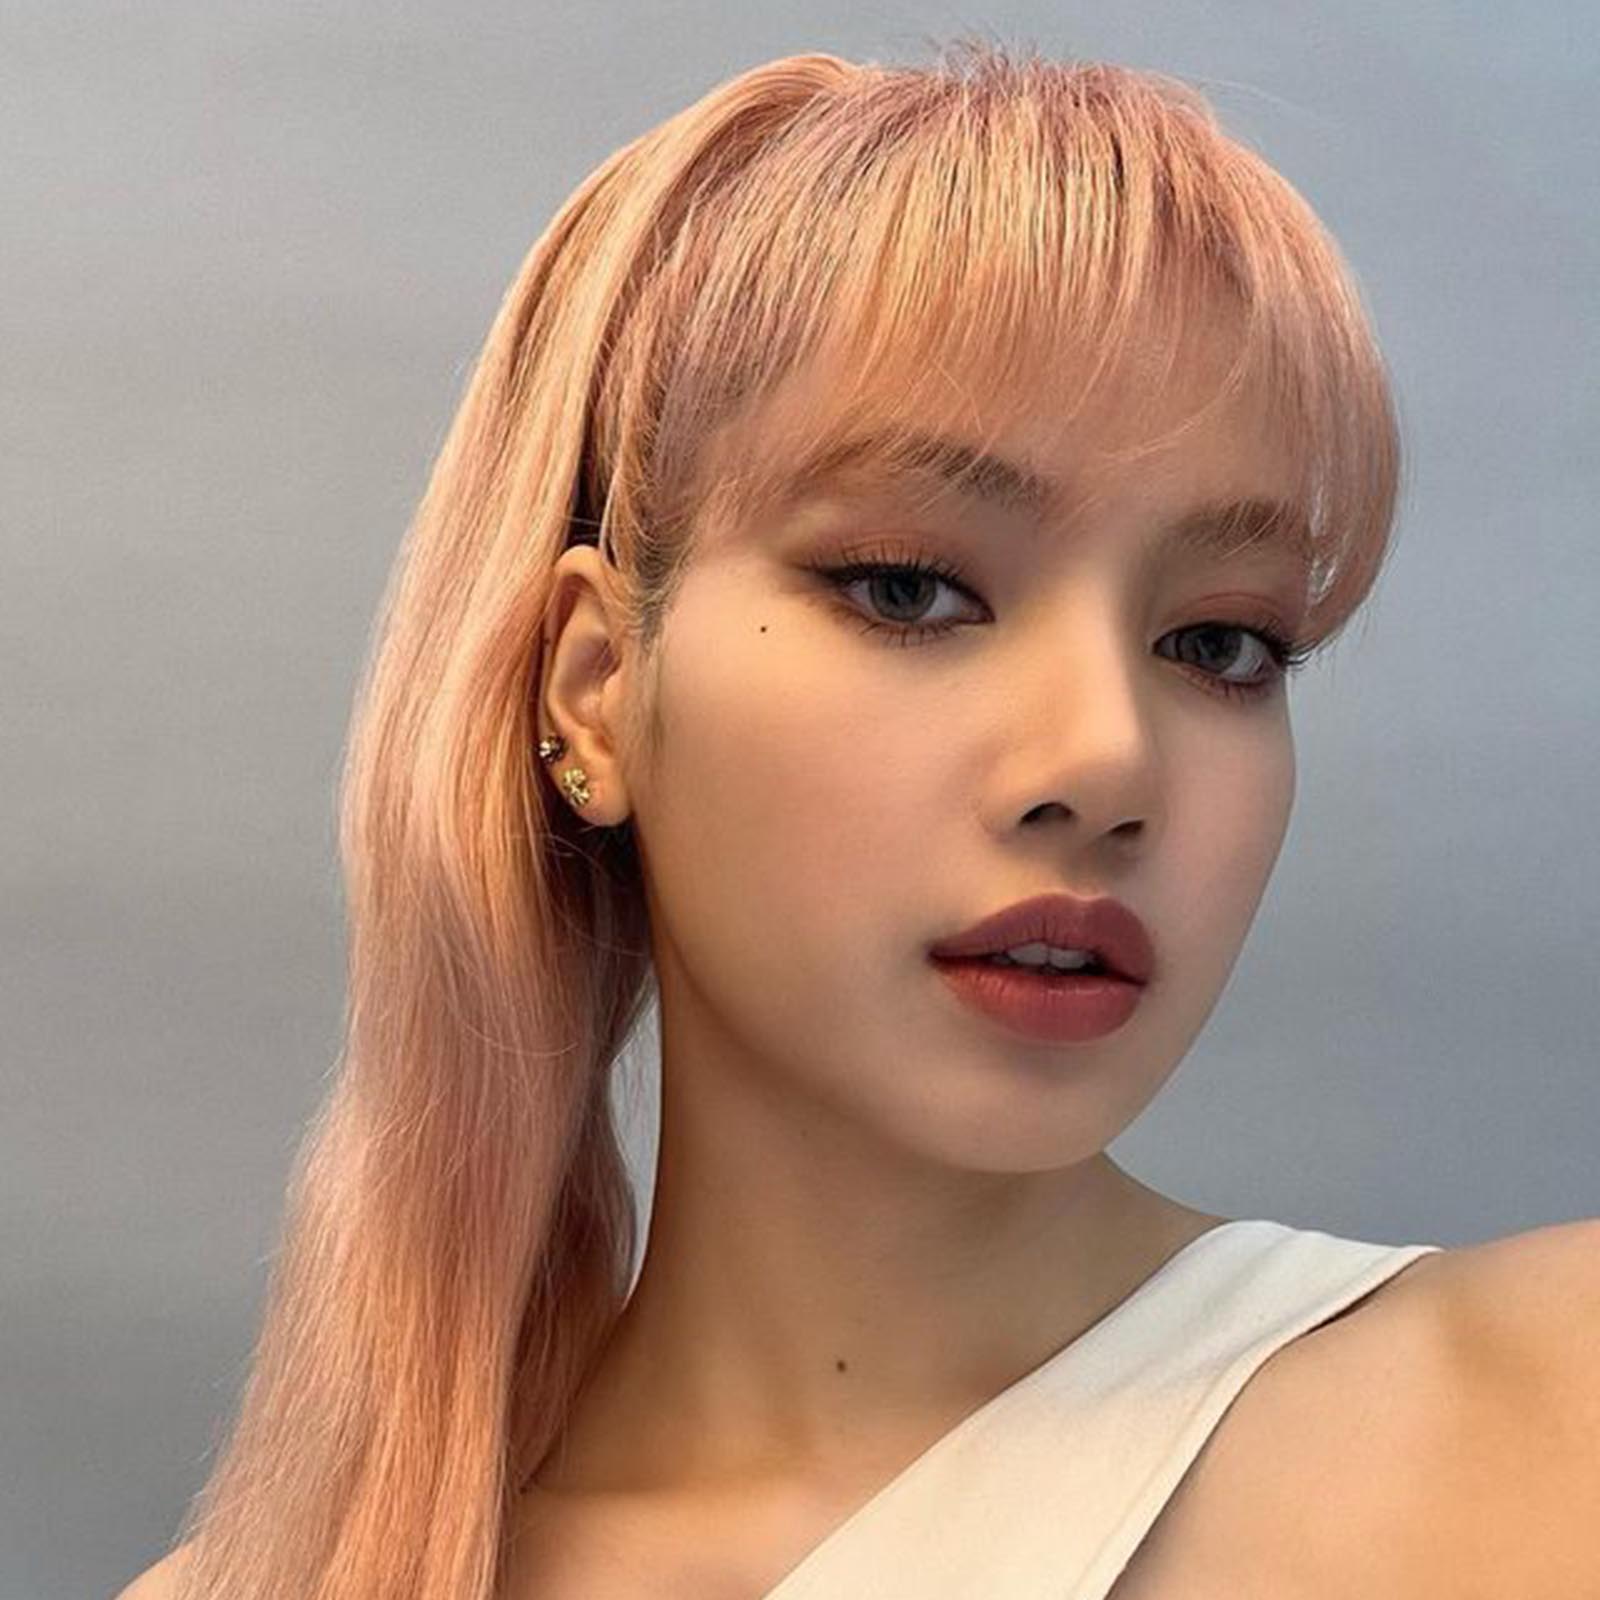 5 Korean Hair Trends to Inspire Your Next Hairstyle - The Tease